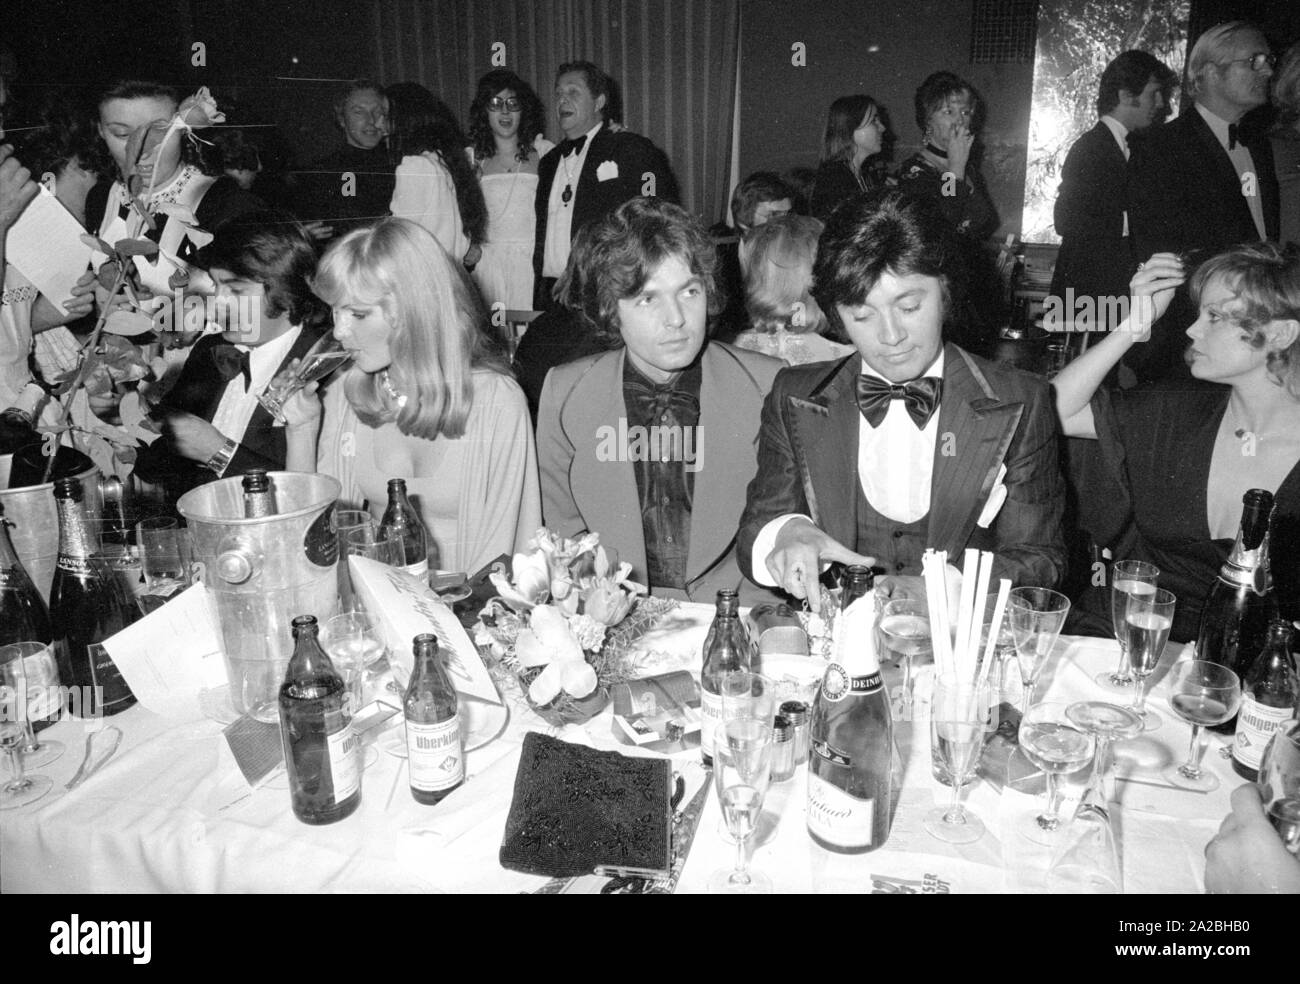 The schlager singers Roy Black (l.), Chris Roberts (2nd from right) and Rex Gildo (r.) at the German Film Ball 1974 in the Bayerischer Hof. Stock Photo